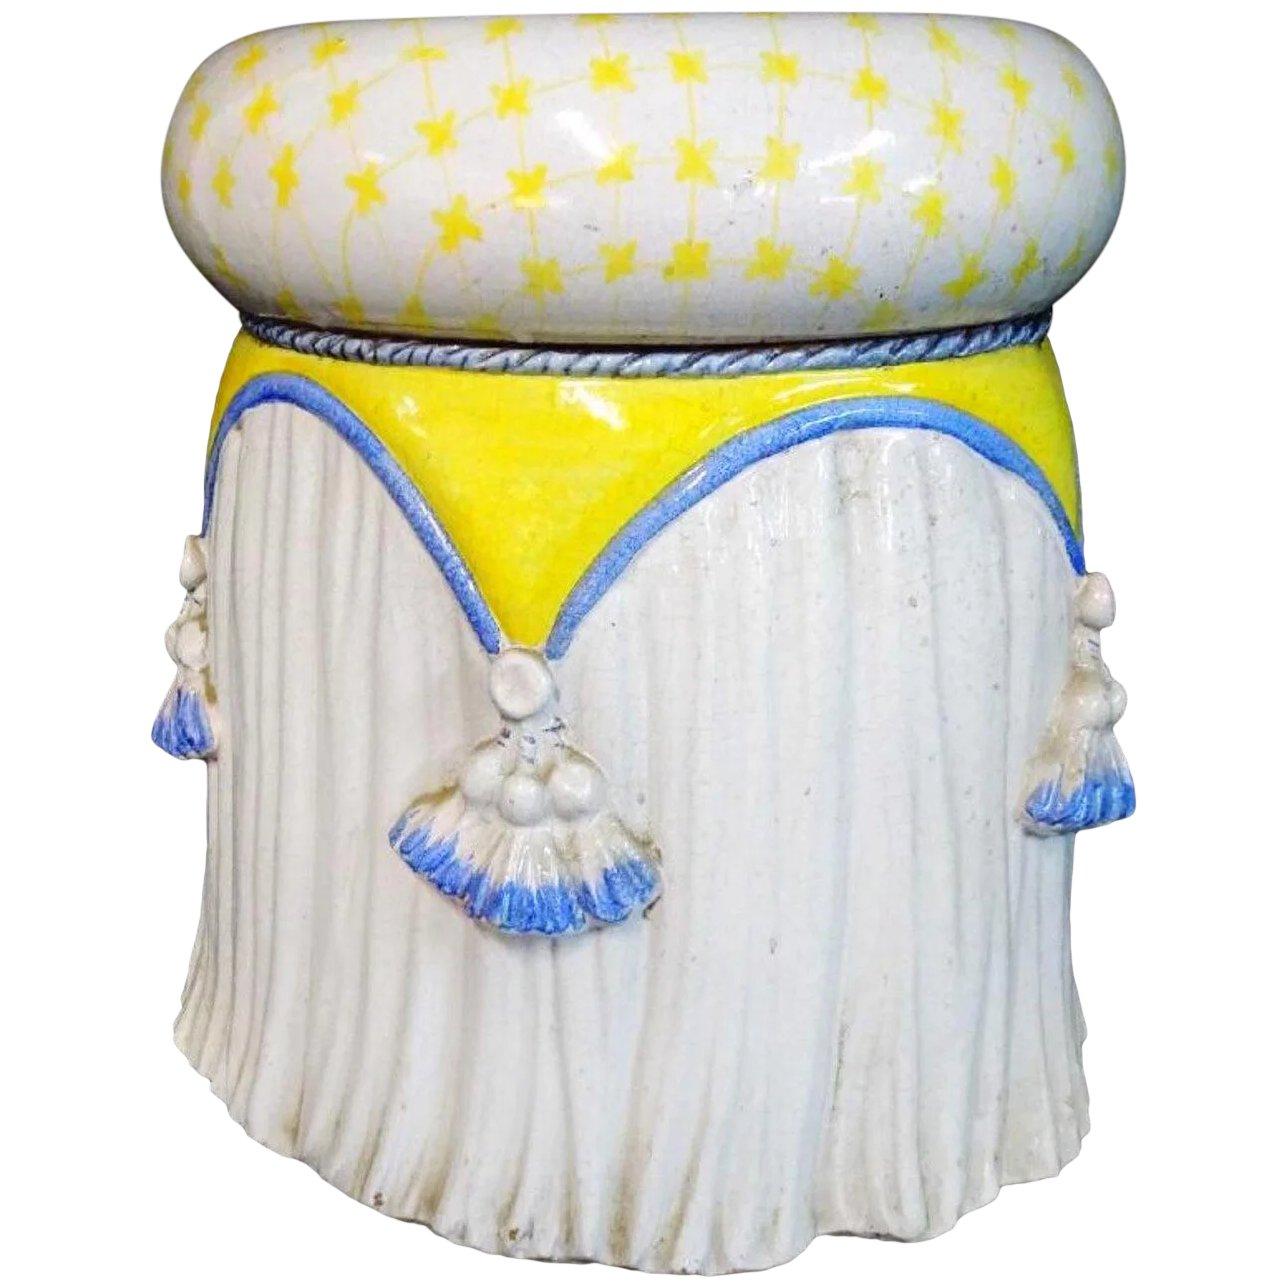 Stunning midcentury handcrafted and hand painted trompe l'oeil garden stool, with canary yellow and cerulean trellis and tassel design.